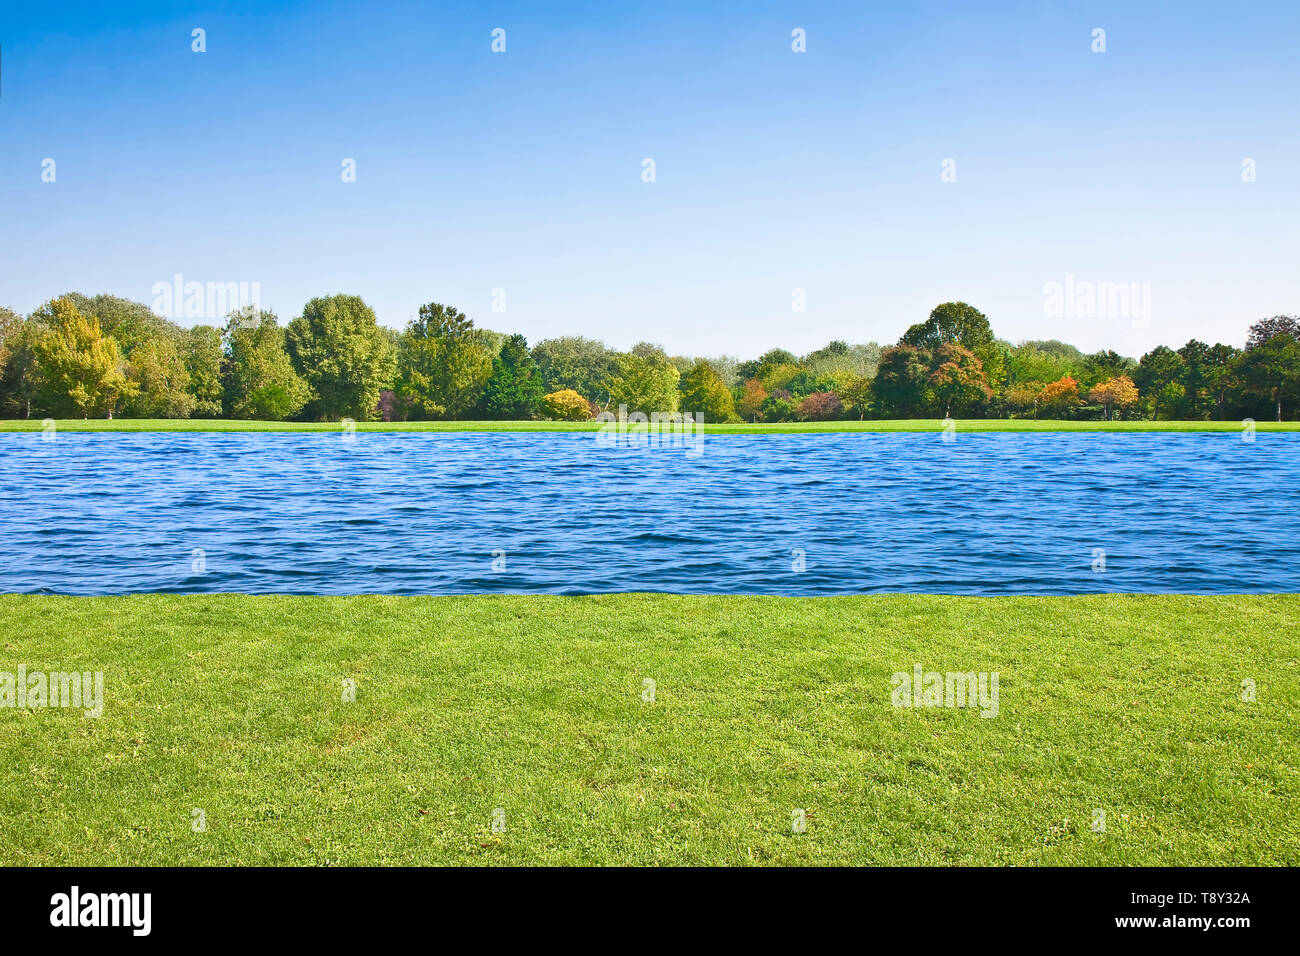 A River Flows Quietly On A Flat Land With Mowed Lawn And Trees Stock Photo Alamy